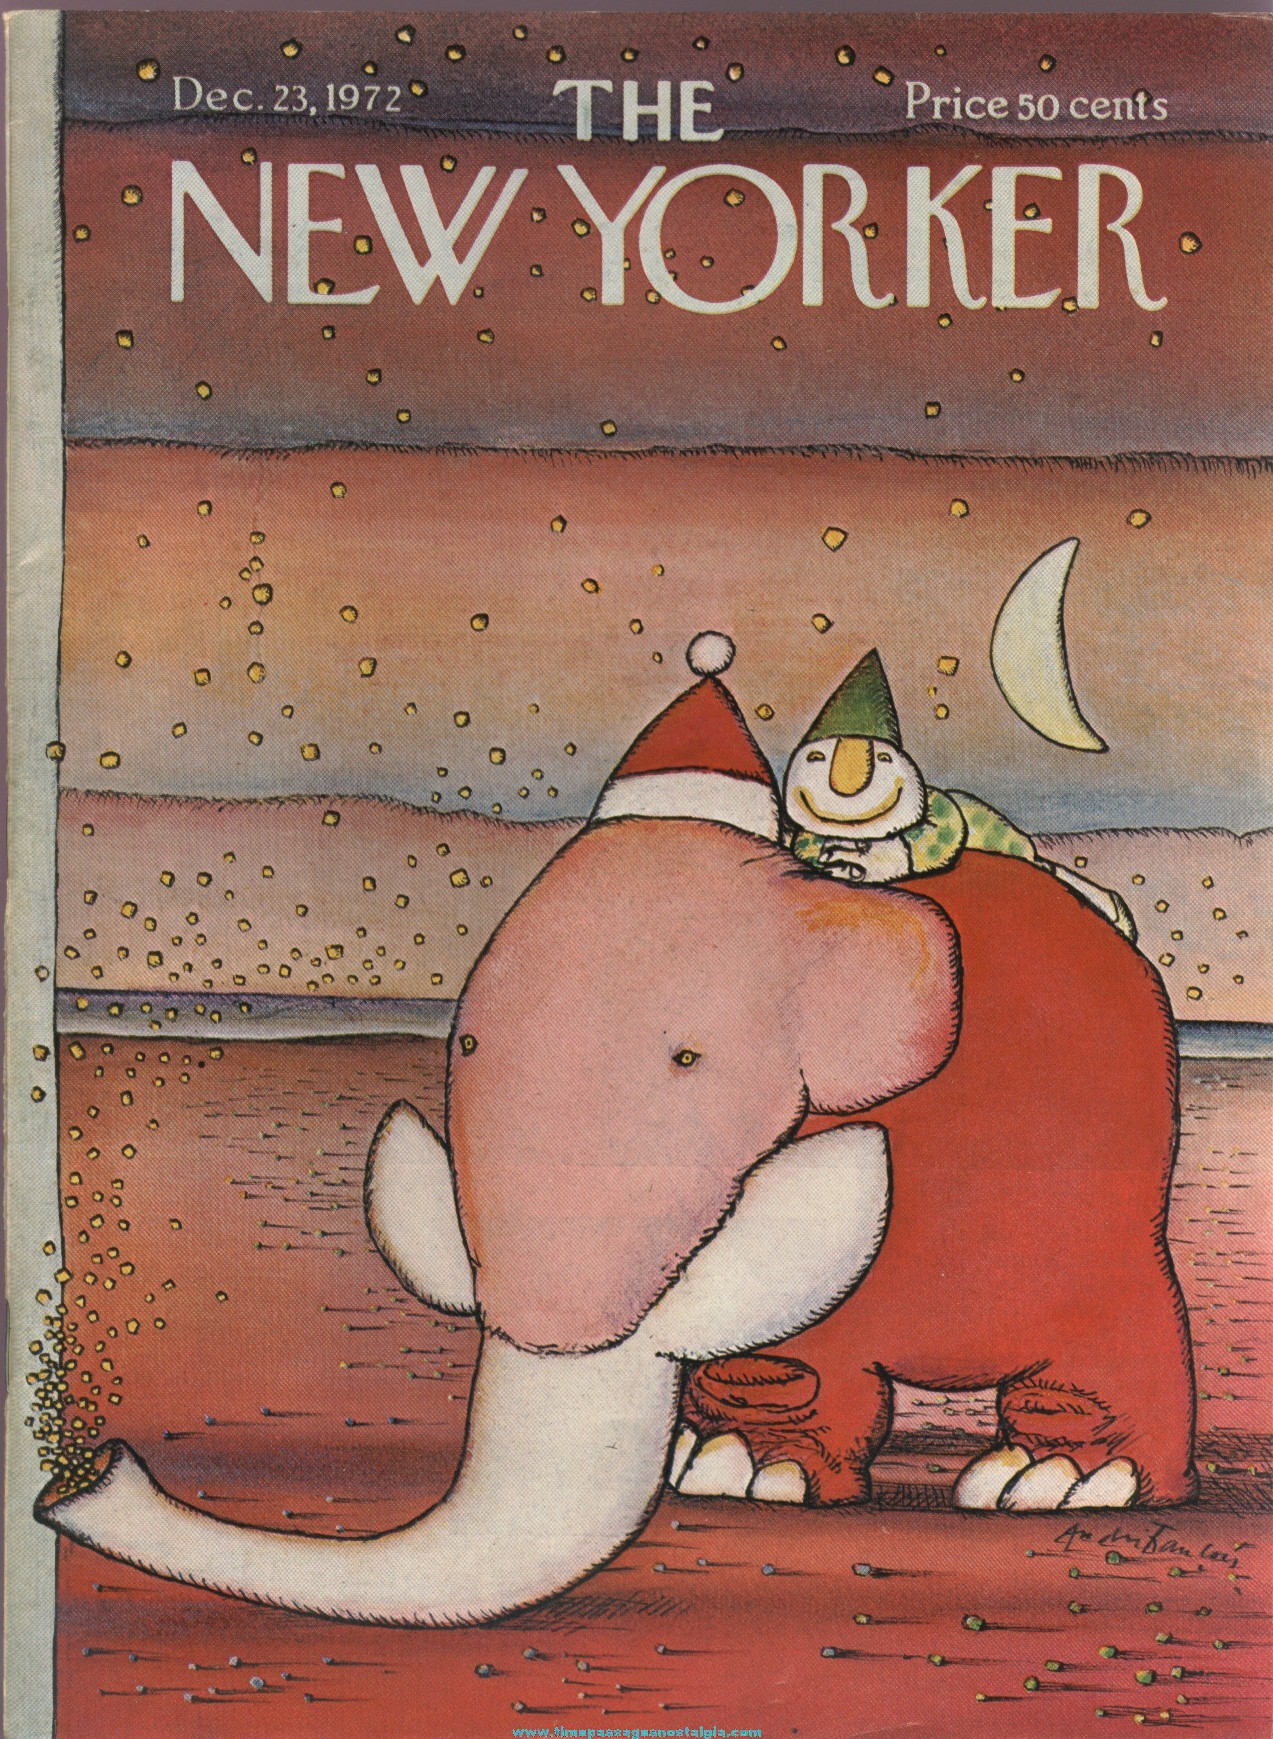 New Yorker Magazine - December 23, 1972 - Cover by Andre Francois